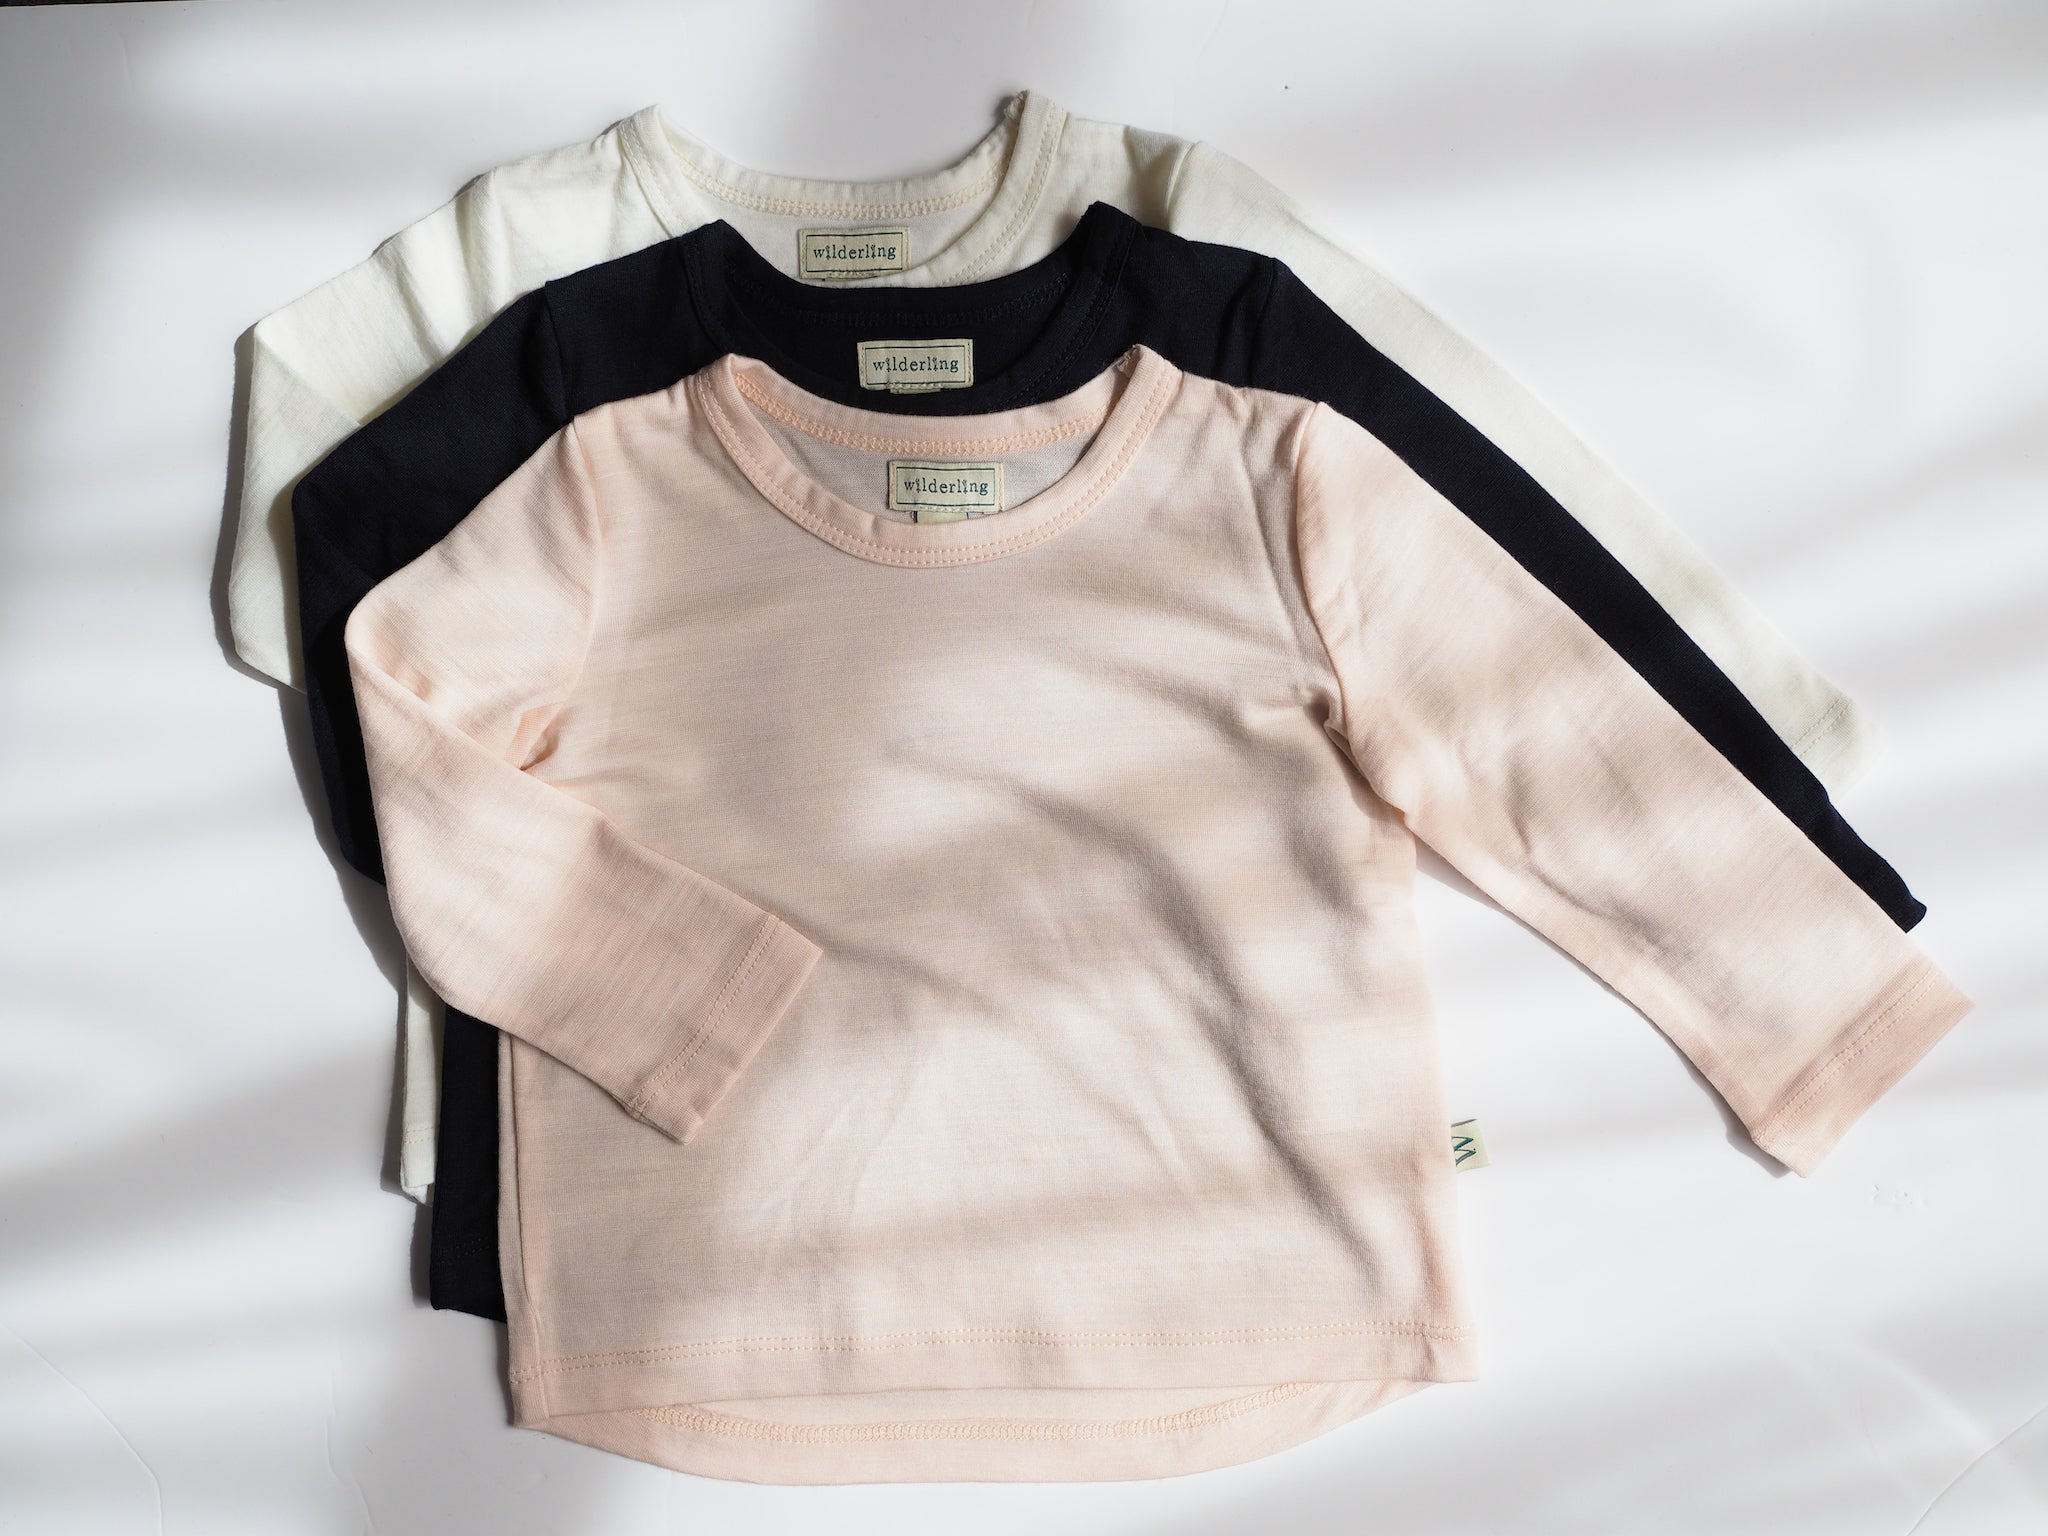 Wilderling Children's Clothing using Natural Fabrics Merino Wool To Create High Quality Products Made In New Zealand